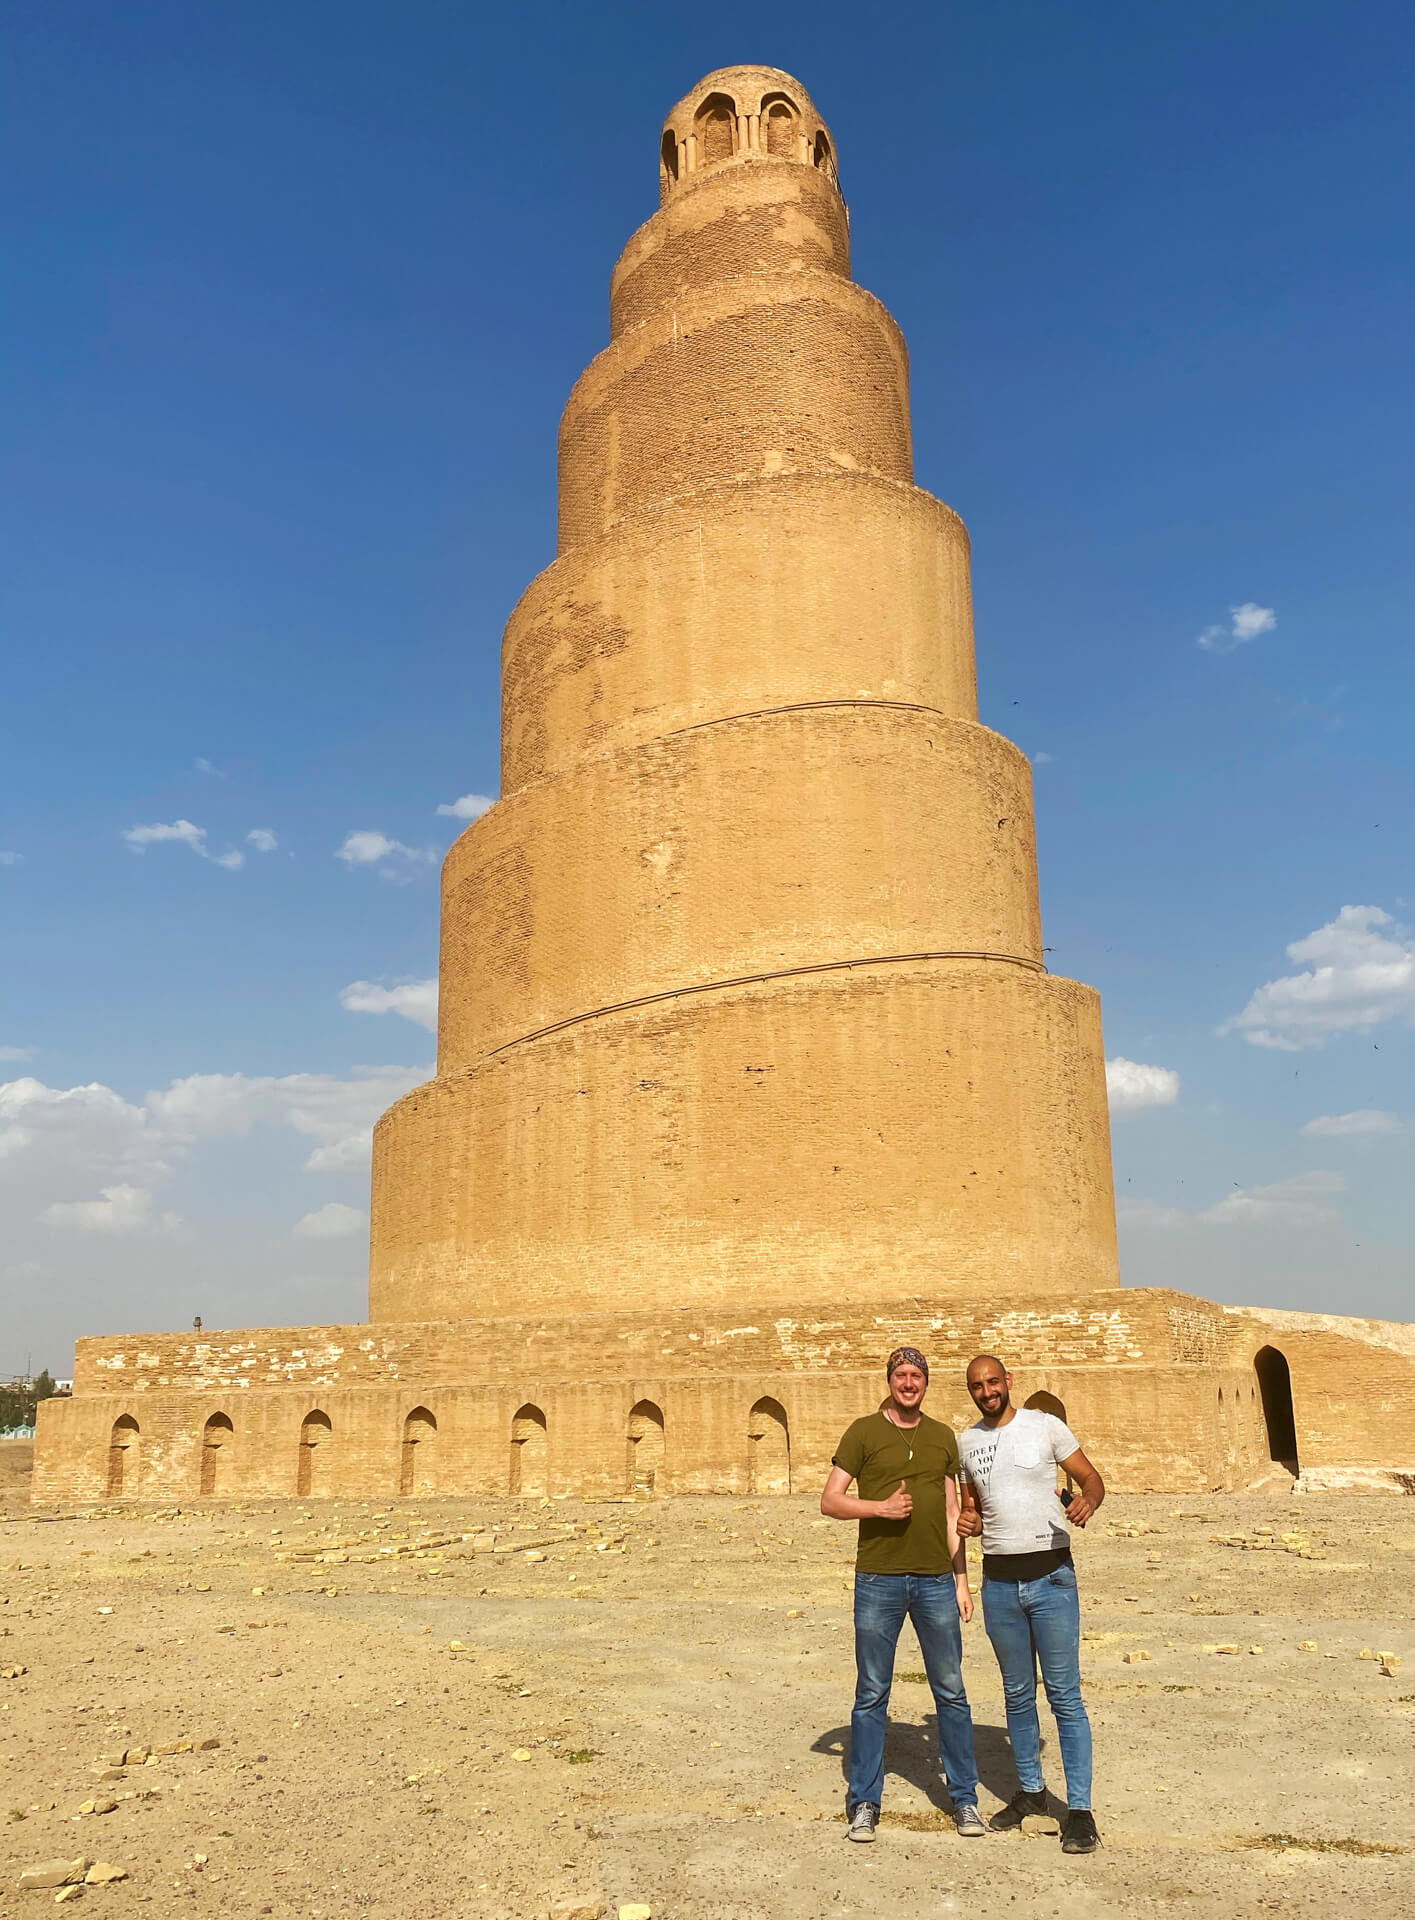 My friend Zeid and I standing in front of the minaret of the Malwiya mosque.